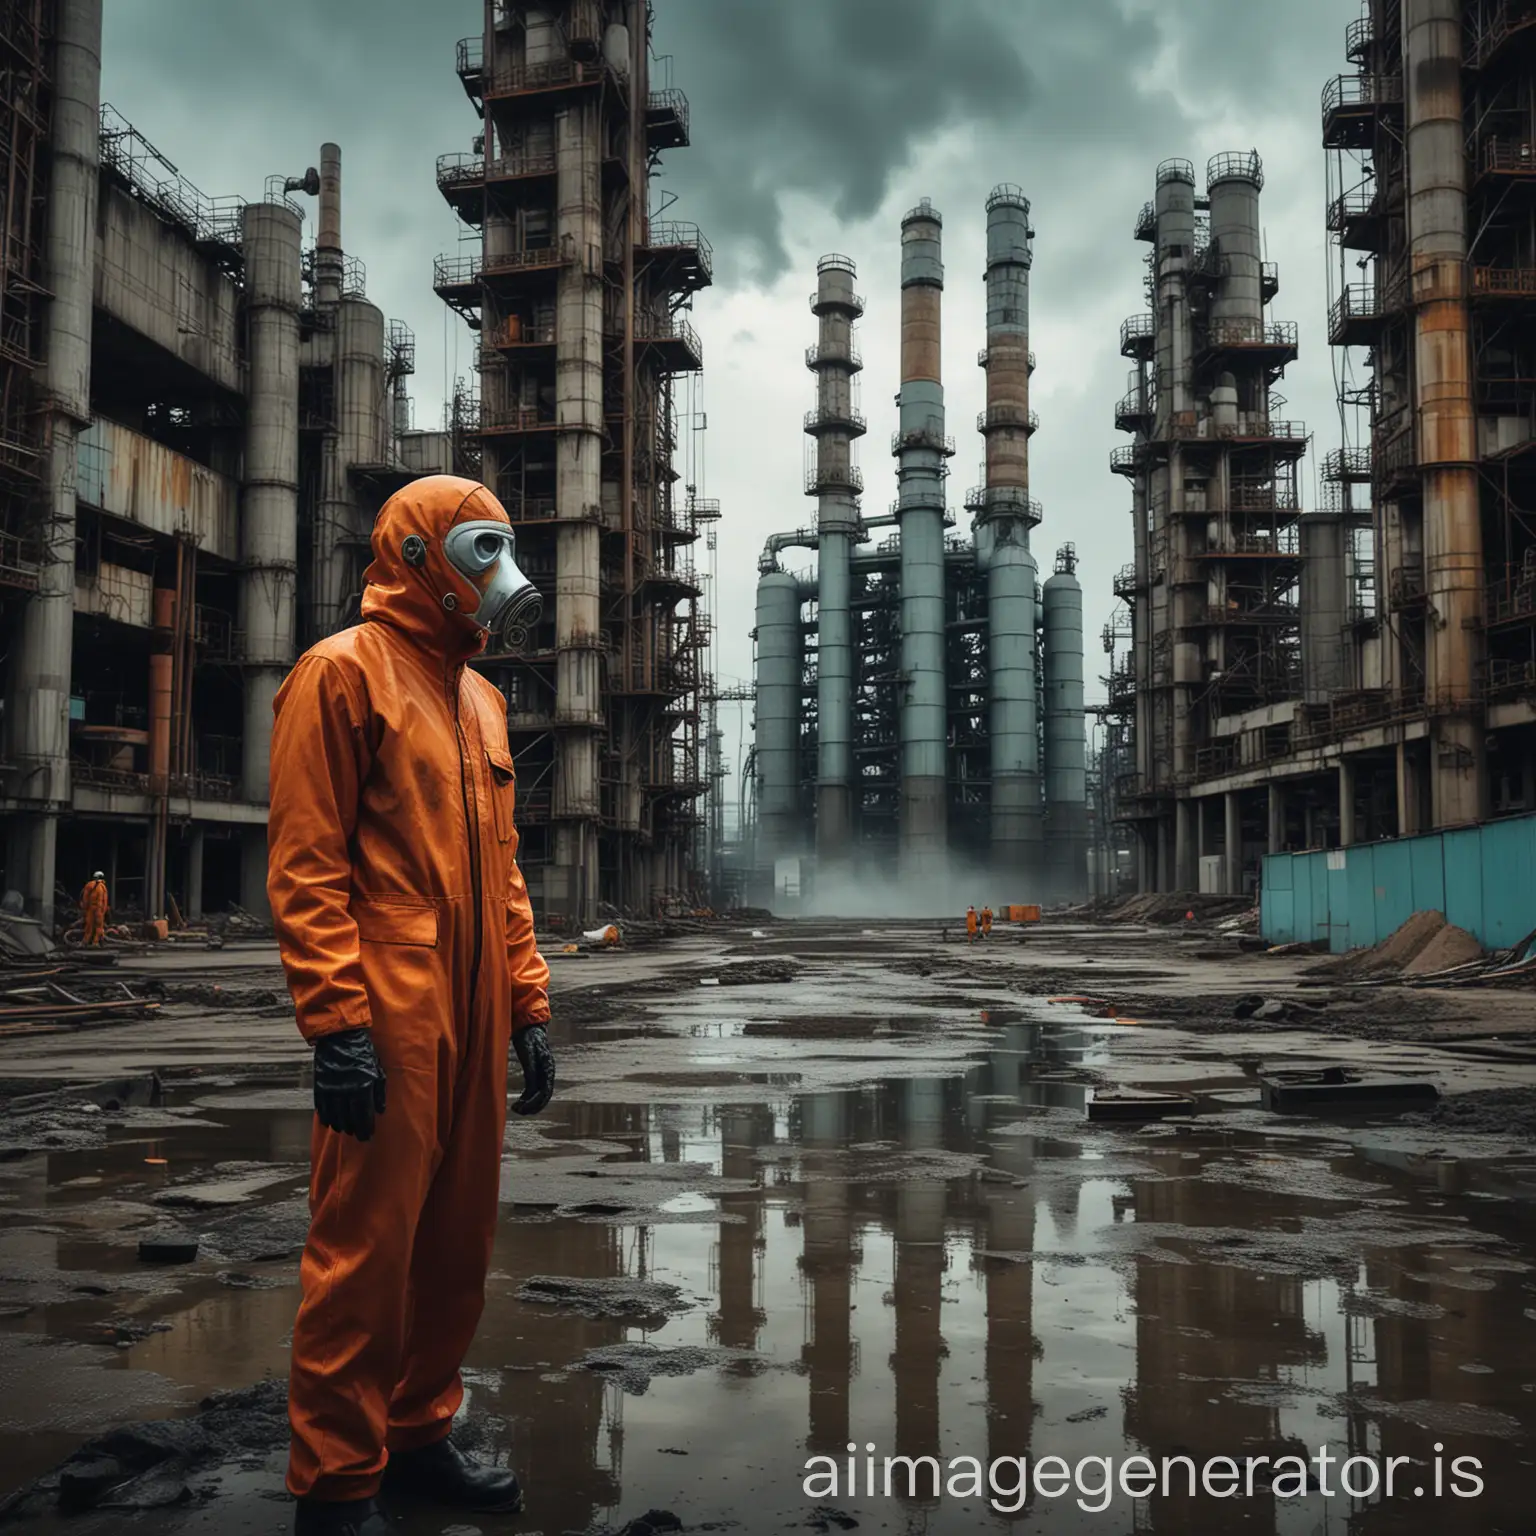 An eerily surreal scene of a man with a trapezoidal aqua-colored suit, wearing a mask with a face that is part human, part machine.He stands amidst towering concrete buildings and massive petrochemical distillation columns, creating a stark contrast between the natural and industrial environments. The color palette is dominated by reds, oranges, and acid yellows, with black clouds looming overhead, casting a foreboding atmosphere. 